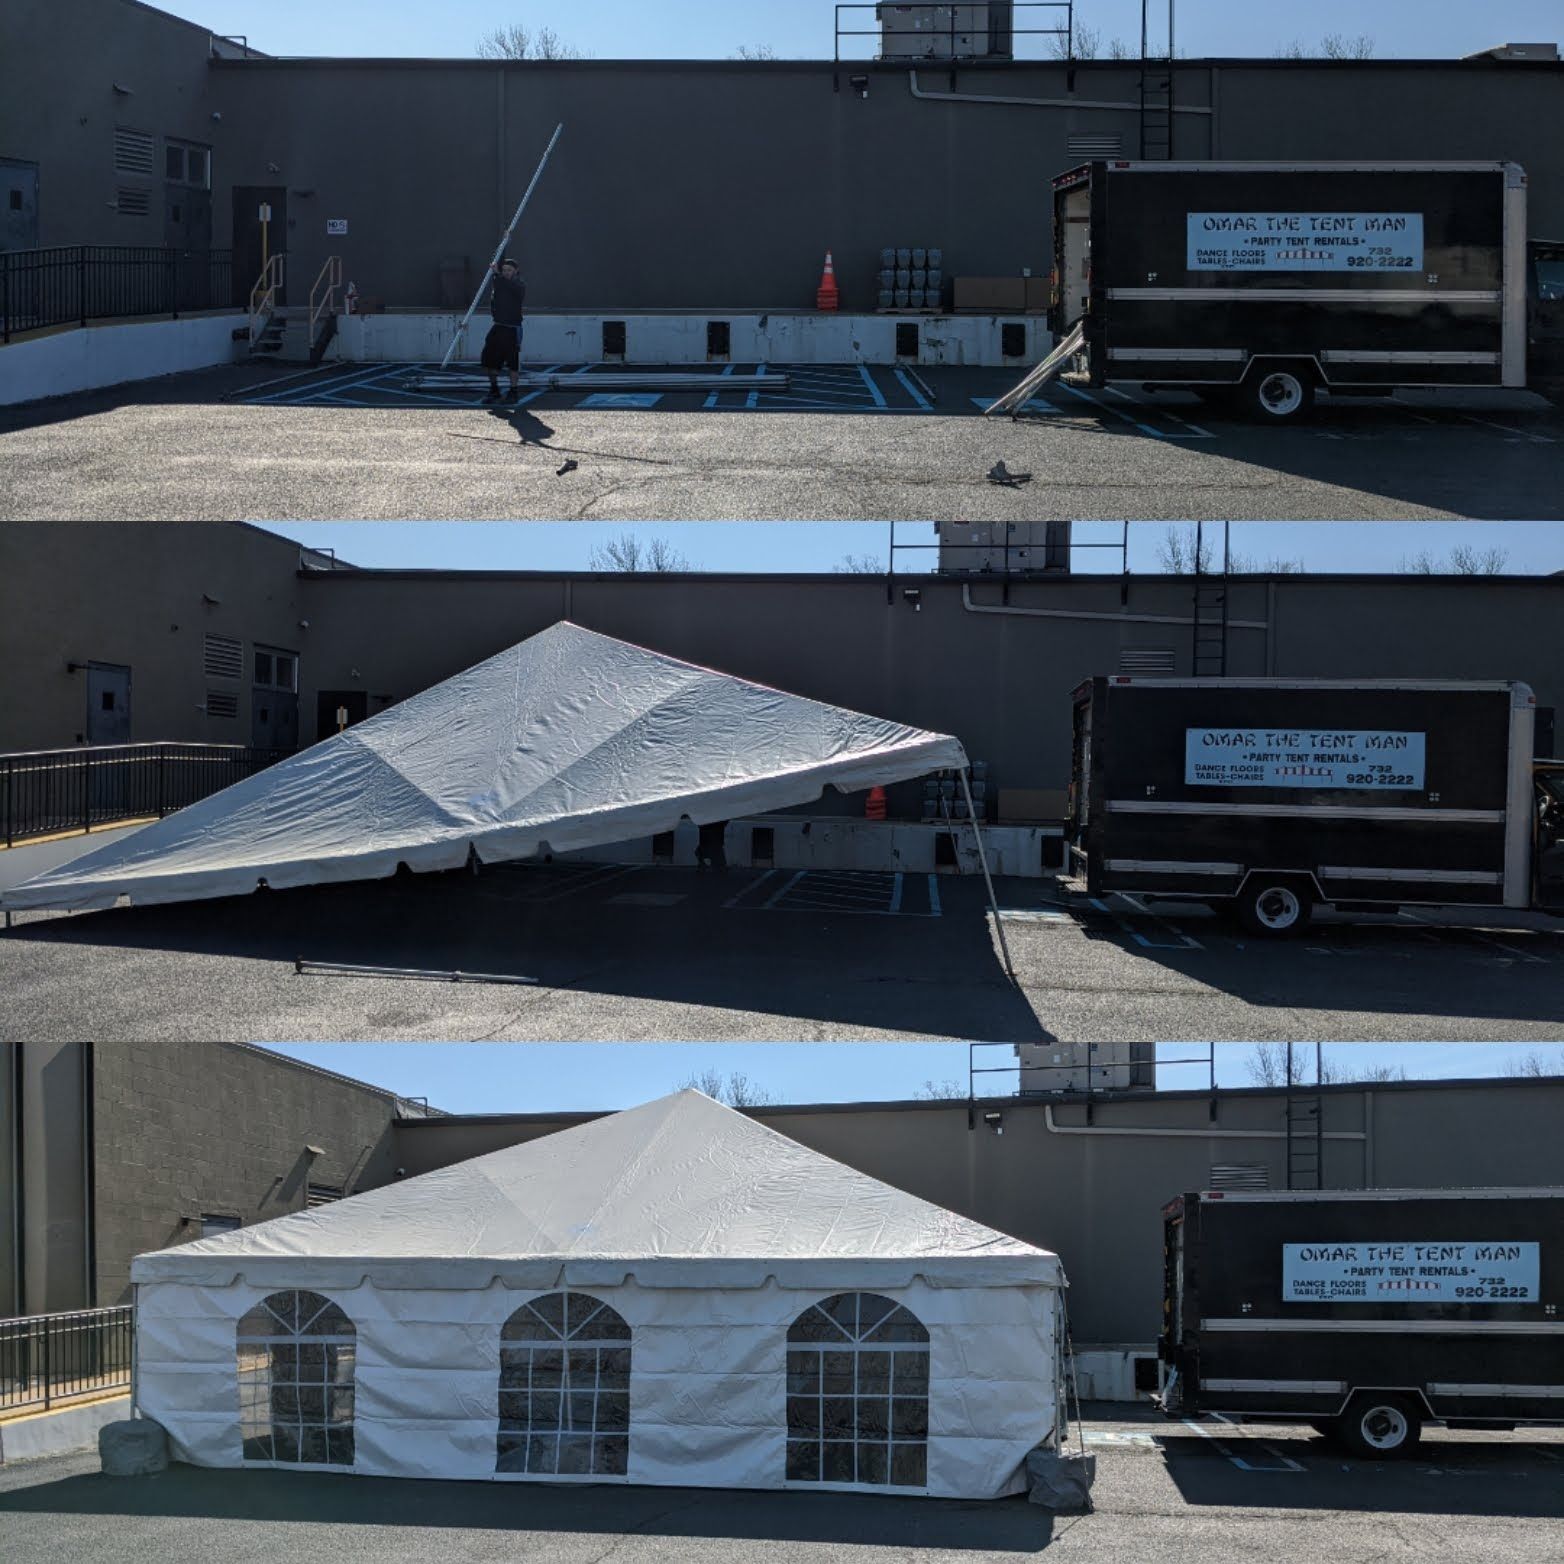 Ongoing setting up of a white tent